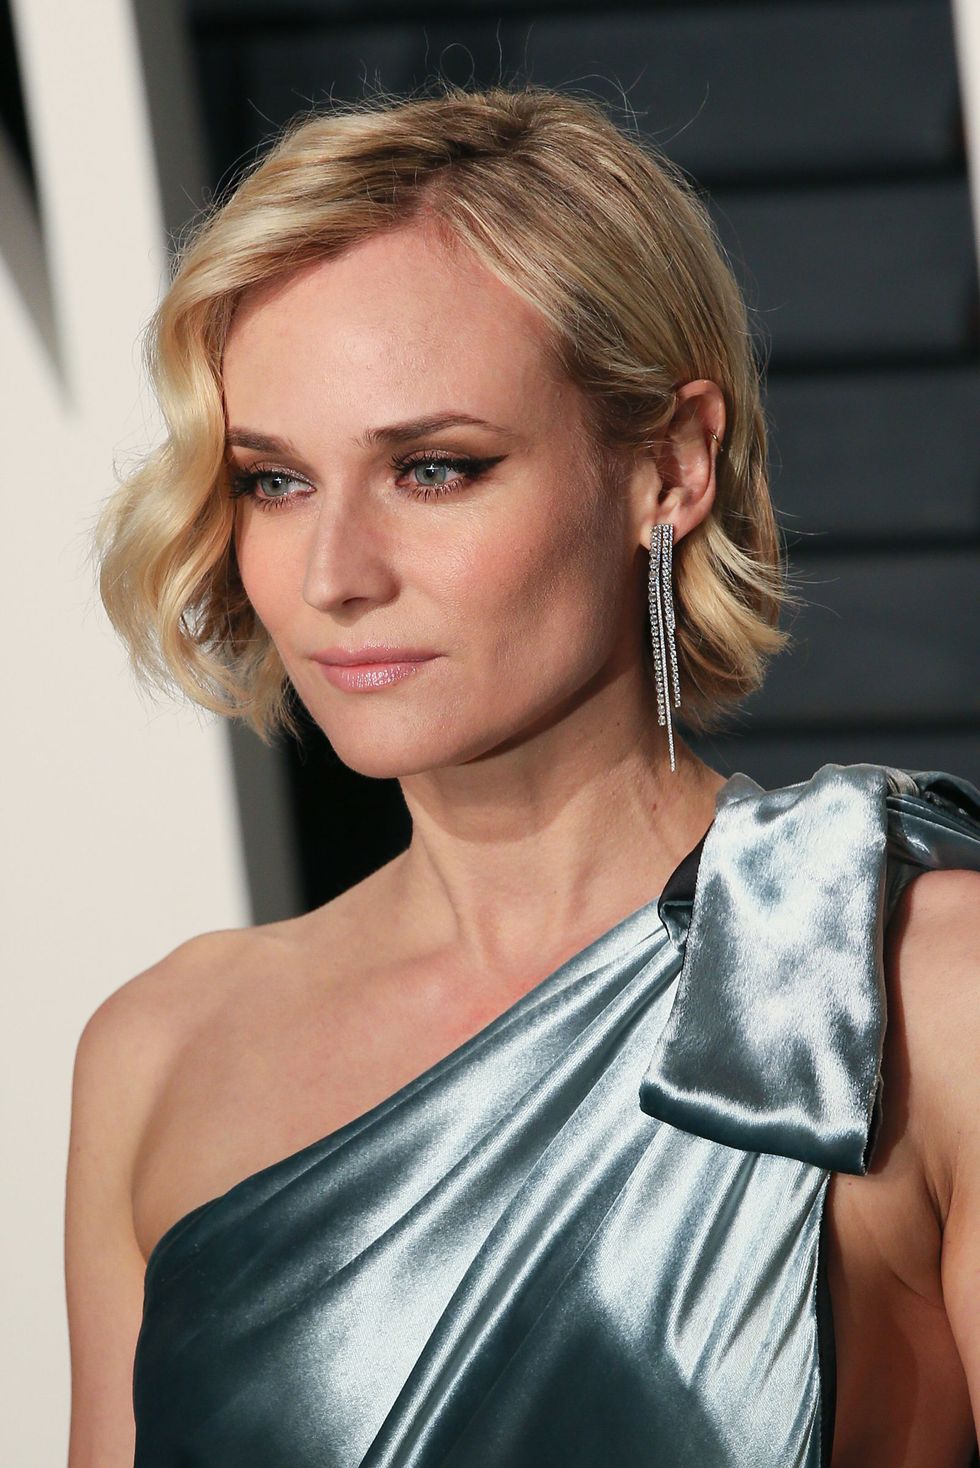 BEVERLY HILLS, CA - FEBRUARY 26:  Actress Diane Kruger attends the 2017 Vanity Fair Oscar Party hosted by Graydon Carter at the Wallis Annenberg Center for the Performing Arts on February 26, 2017 in Beverly Hills, California.  (Photo by David Livingston/Getty Images)